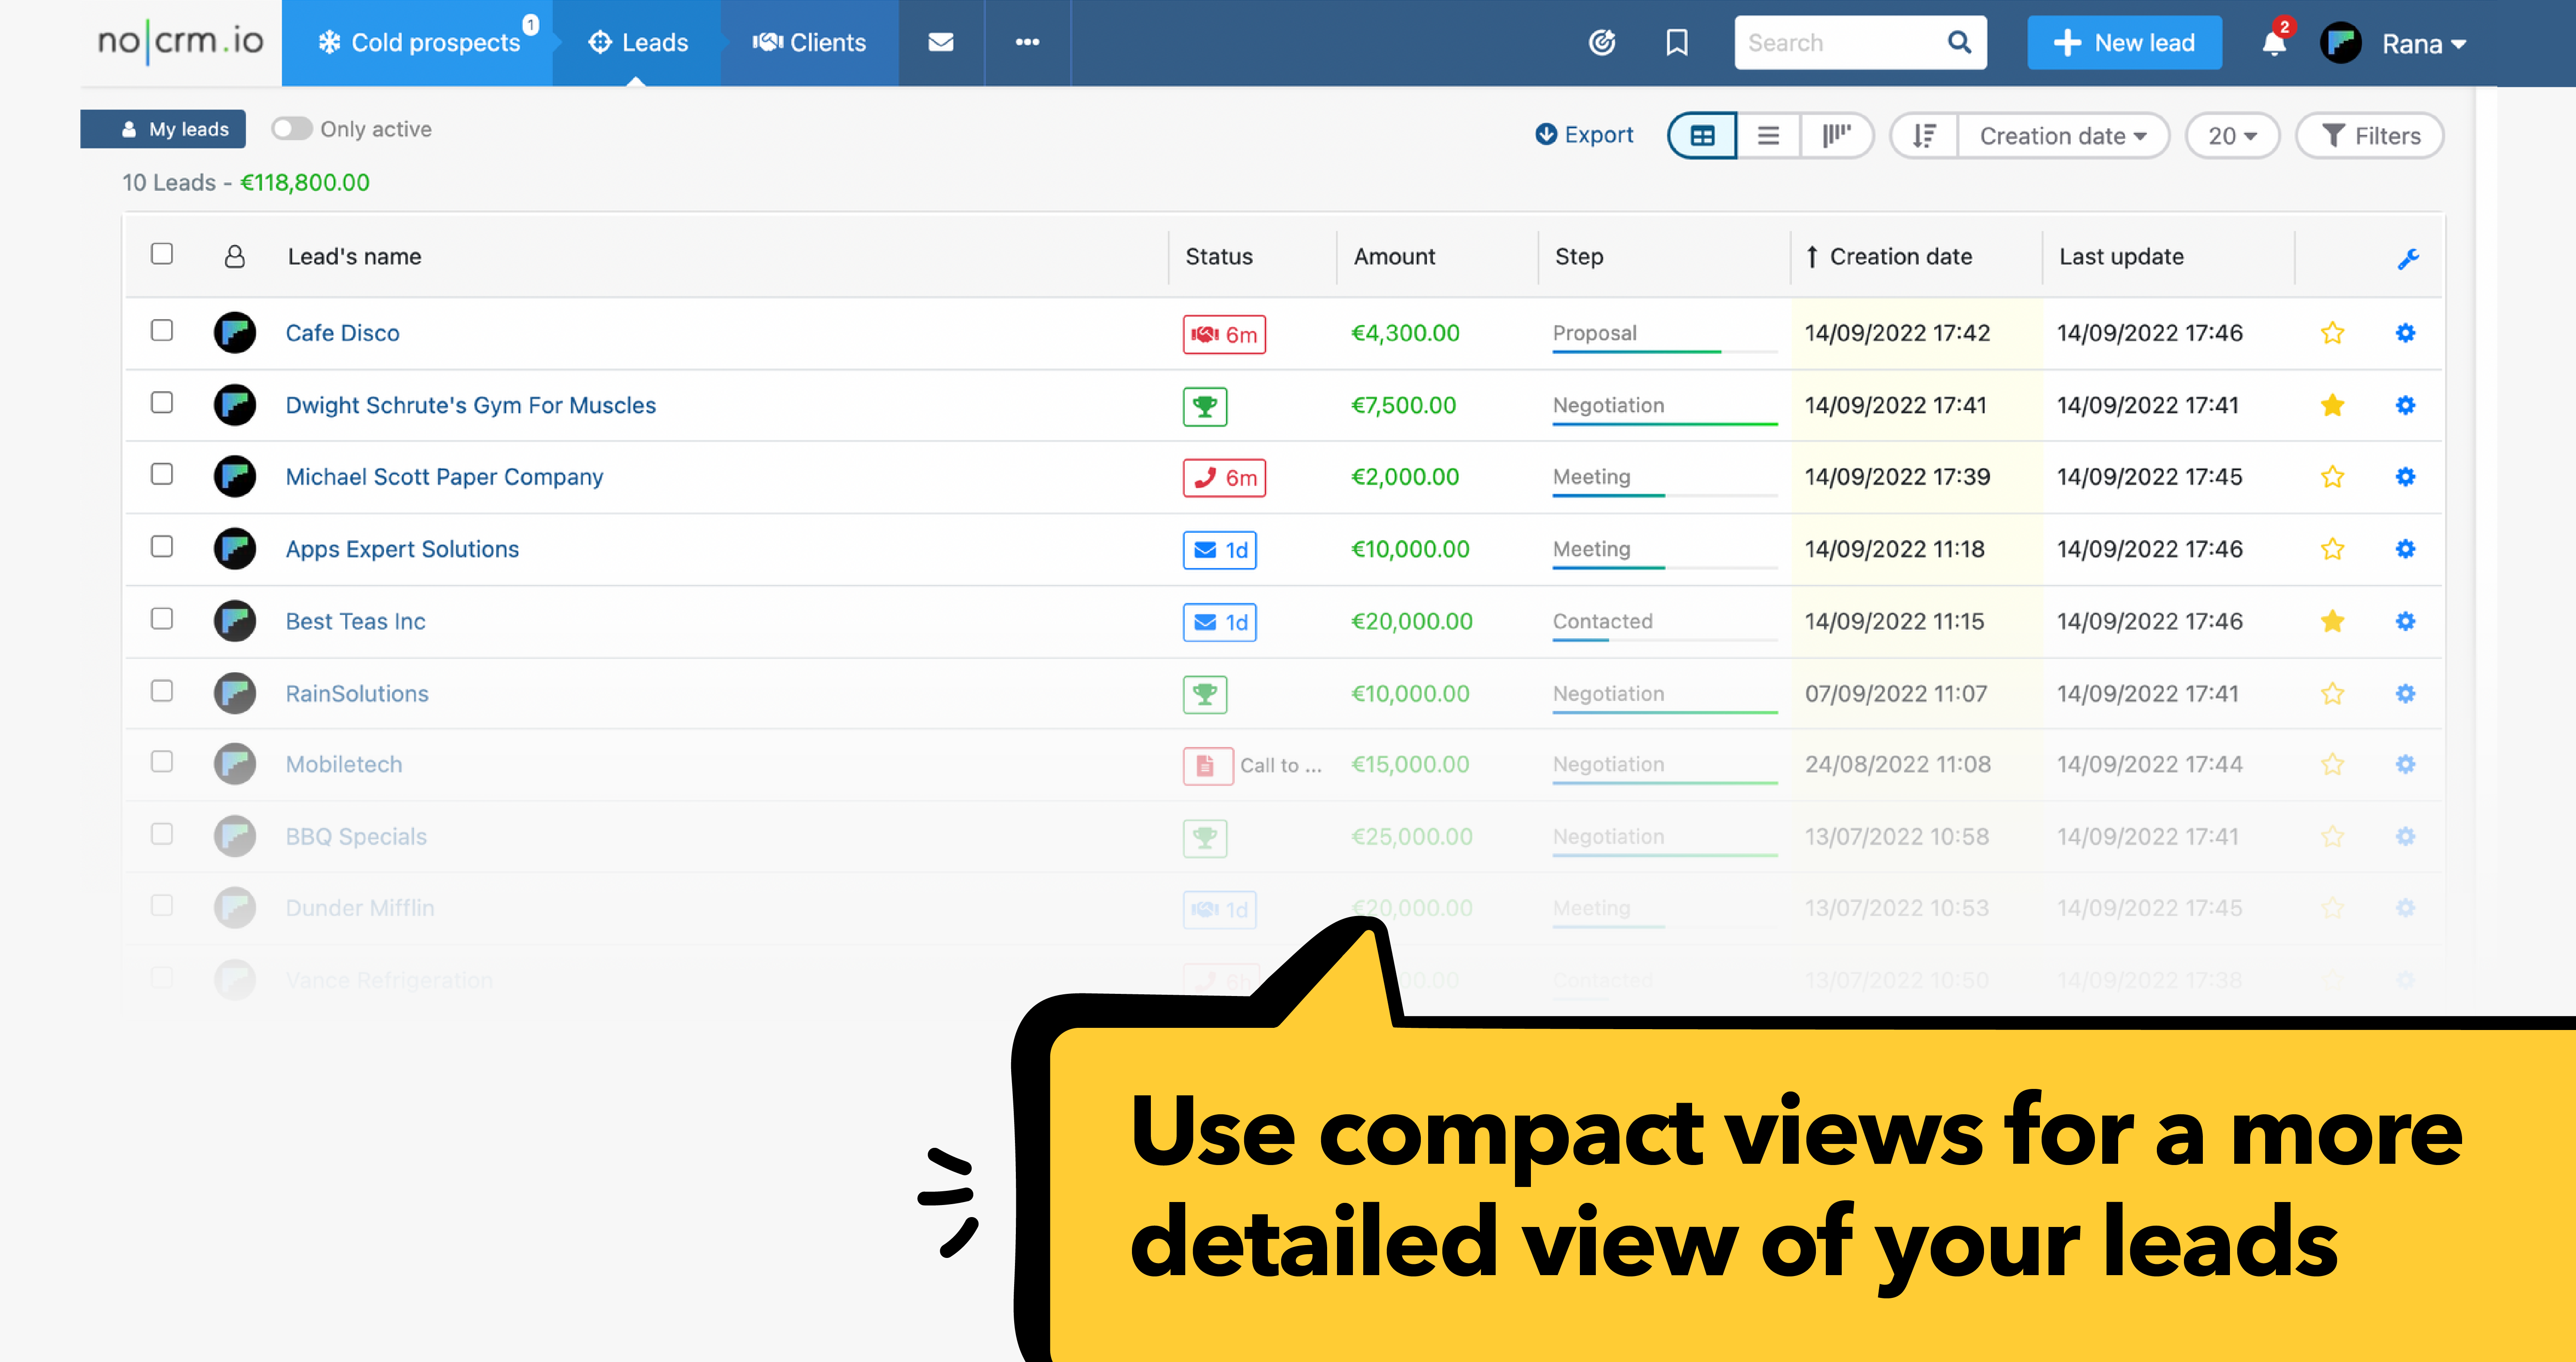 noCRM.io Software - Quickly view your leads' details and next actions to perform